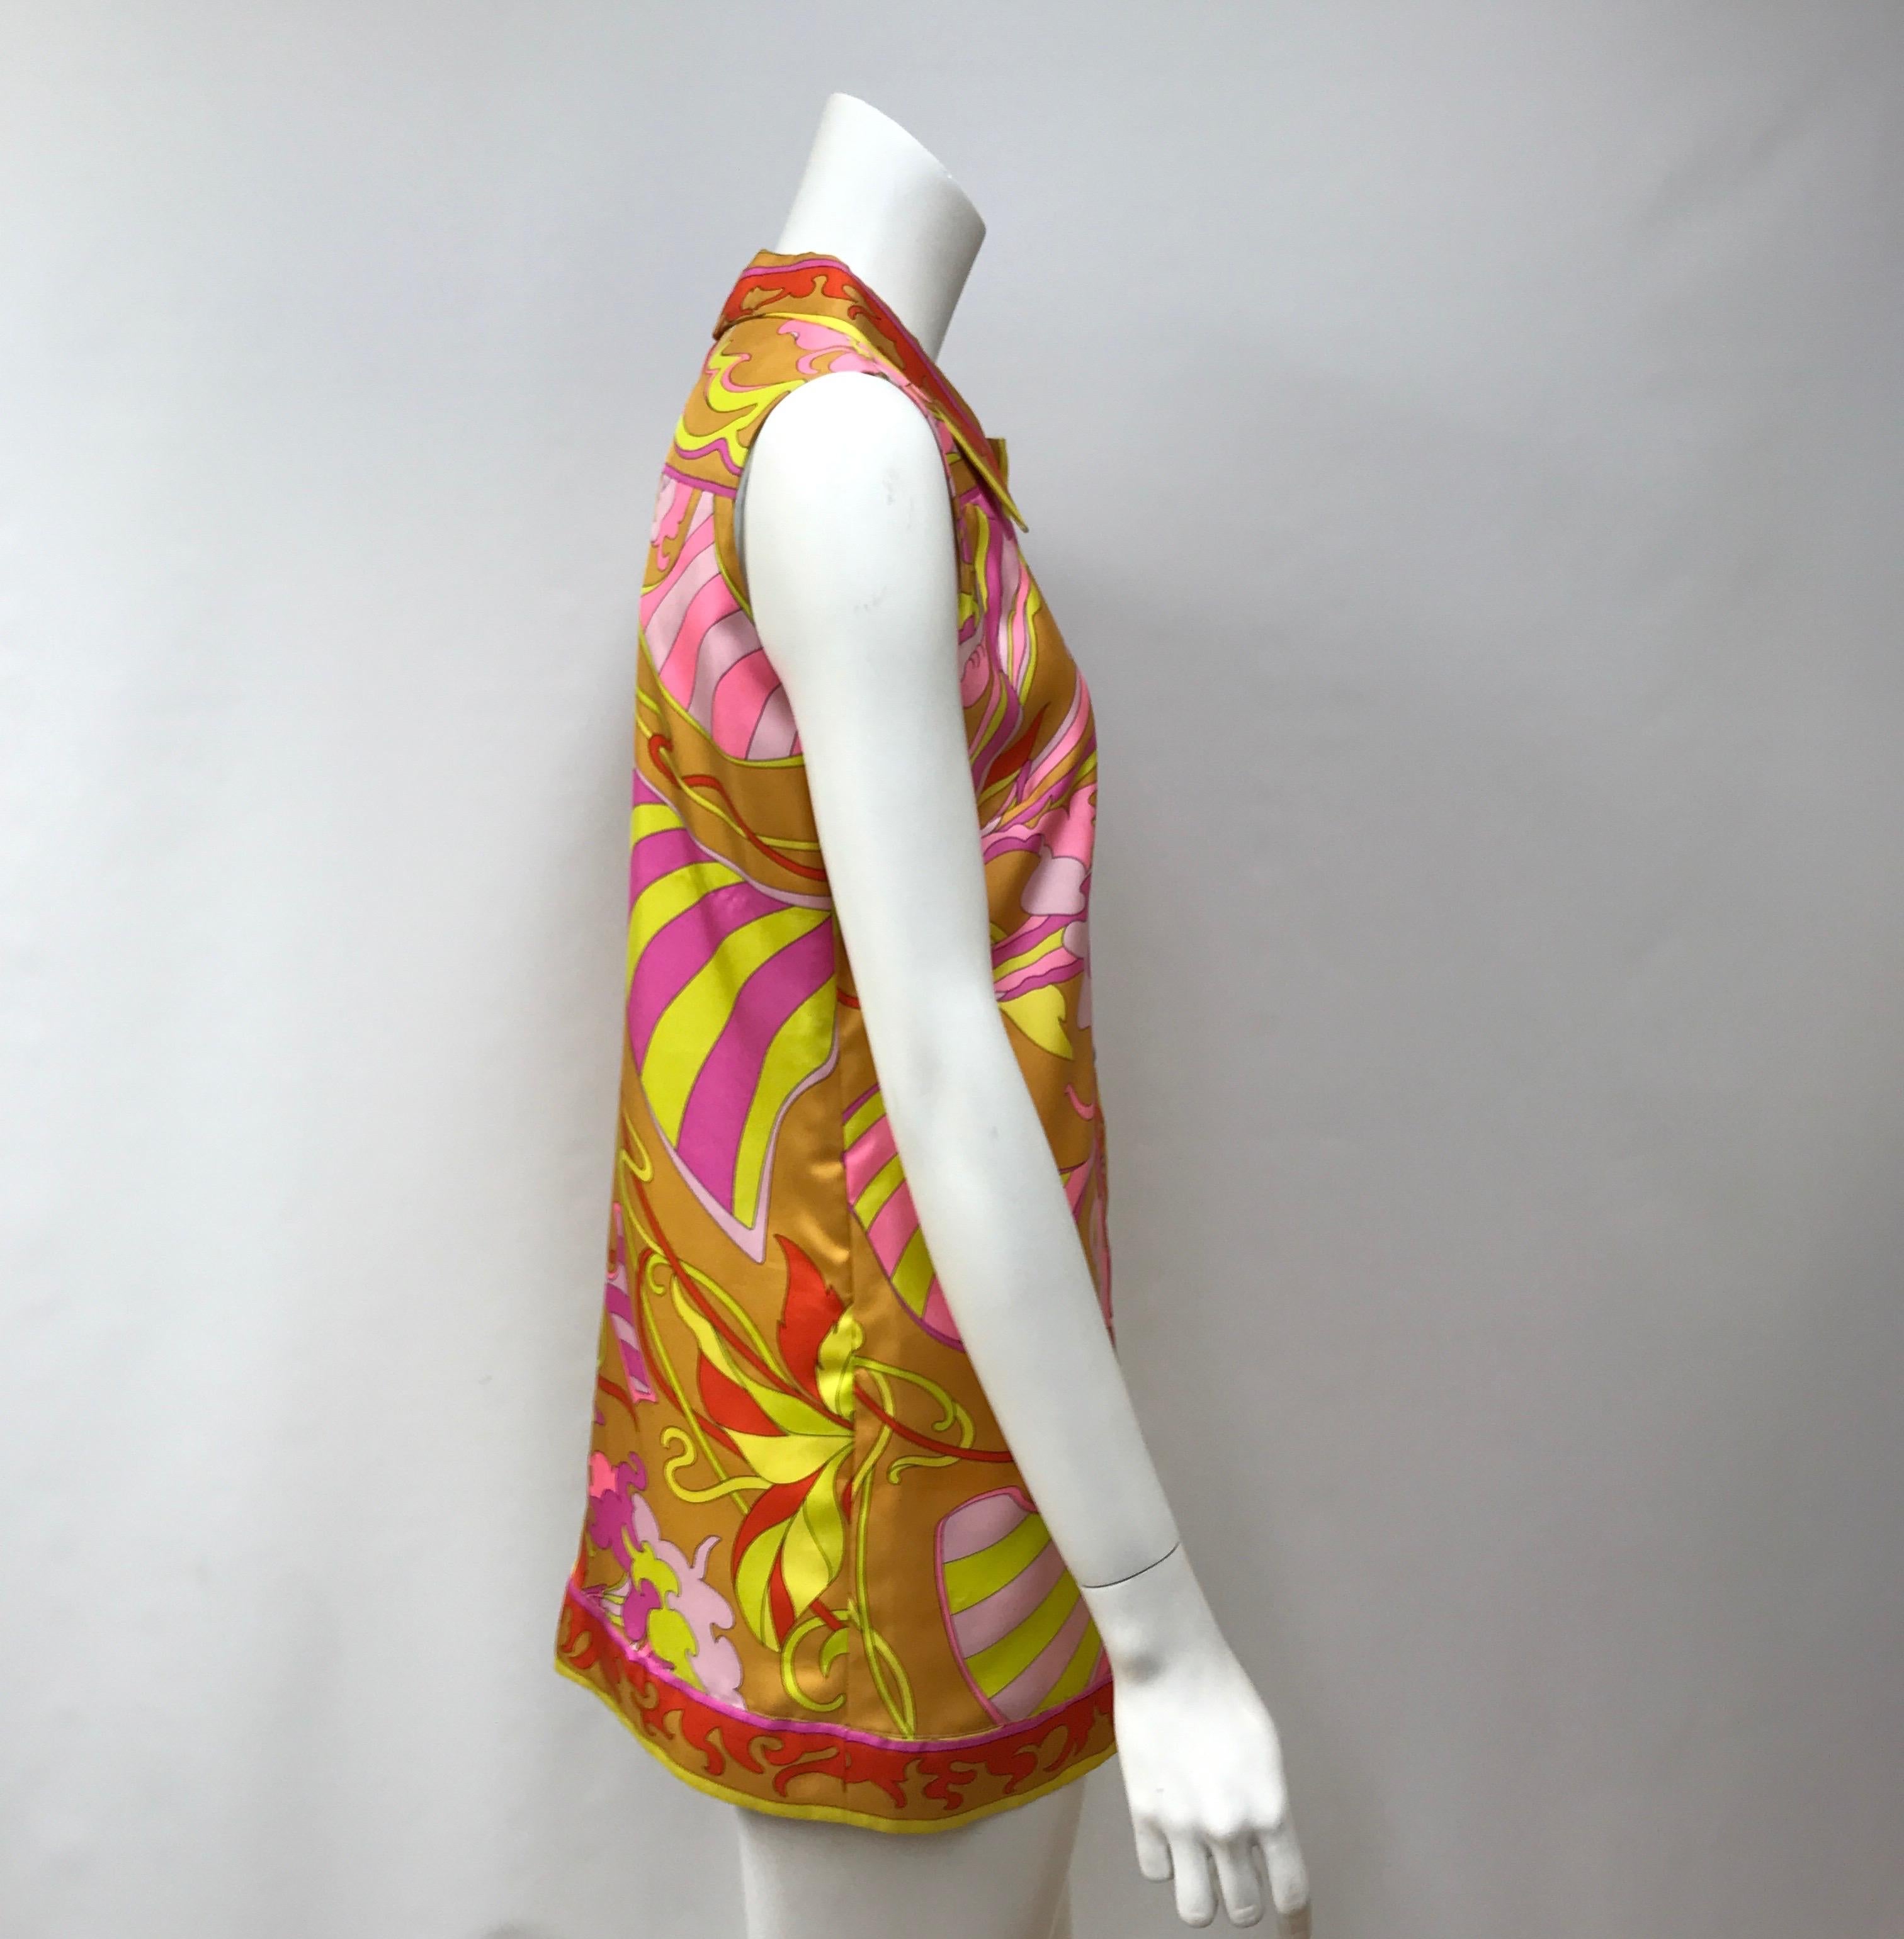 Emilio Pucci Silk Orange, Yellow, and Pink Button Down Top-42. This amazing Emilio Pucci top is in excellent condition, it has minimal signs of use. The top is made of silk throughout and has an abstract design with orange, yellow, and pink colors.